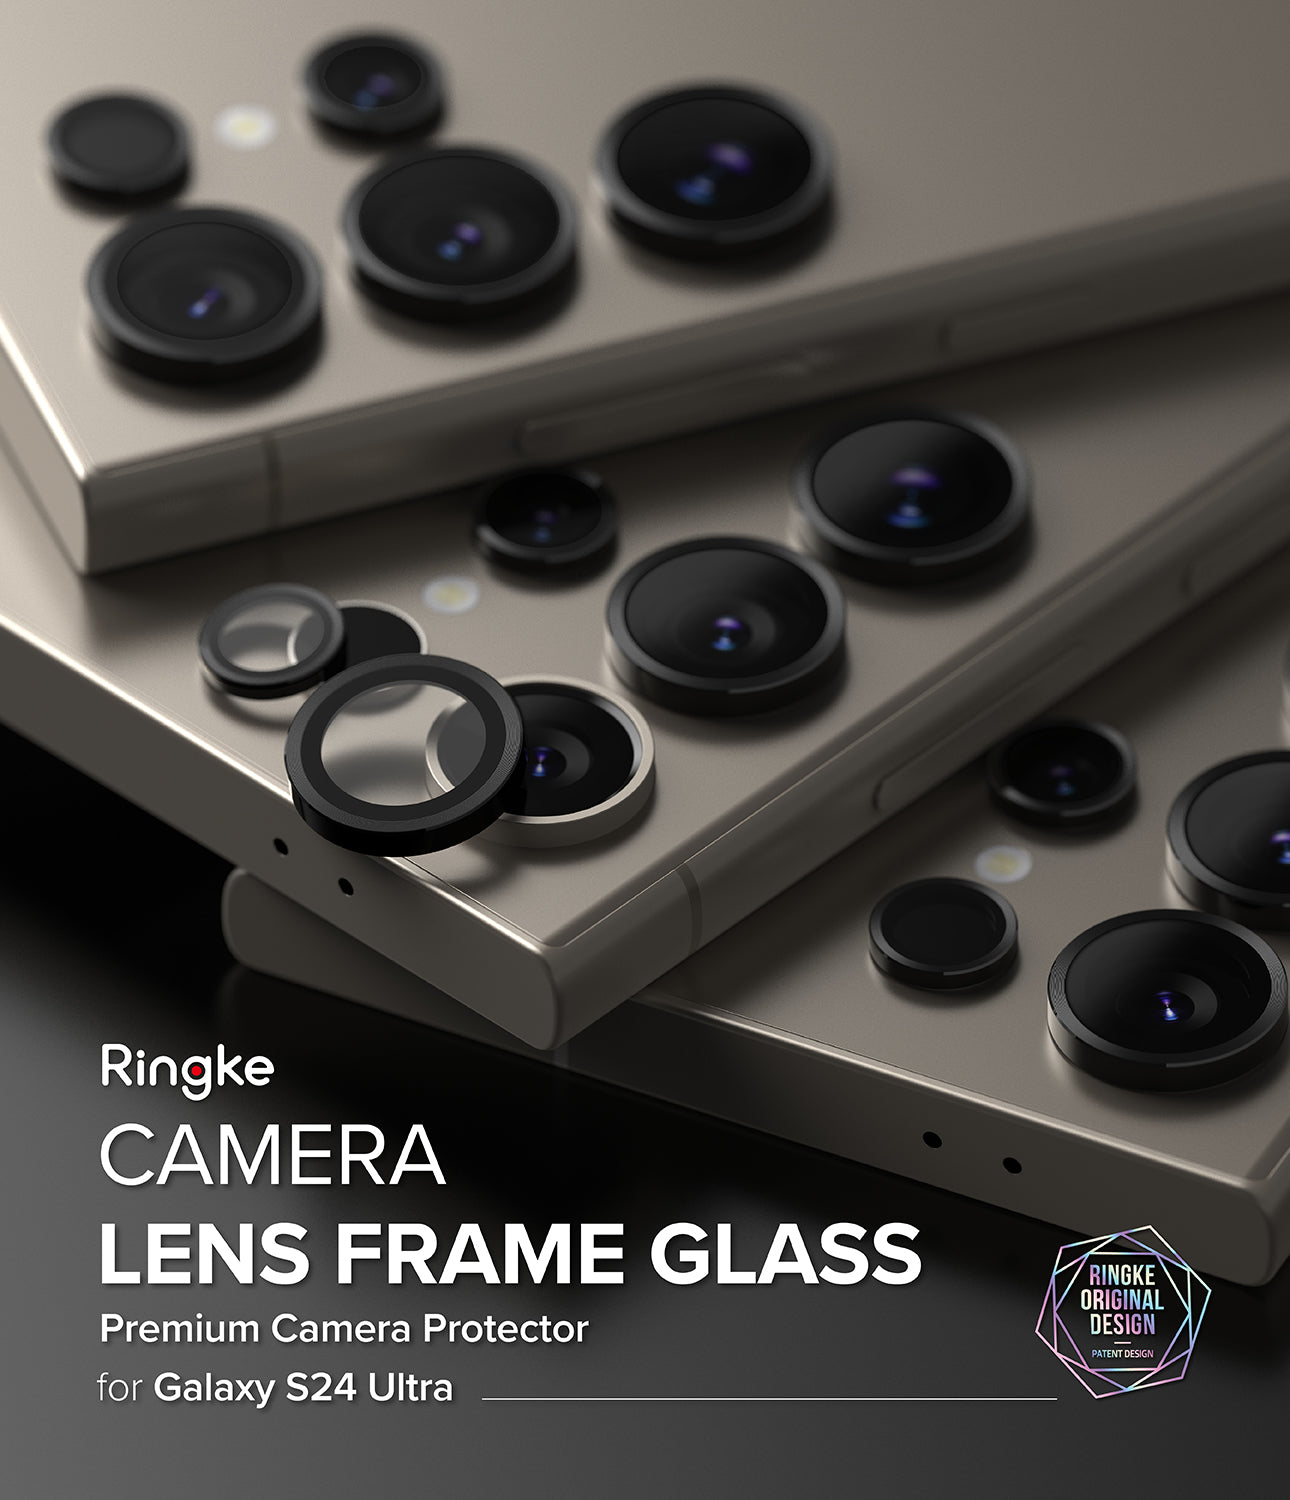 Galaxy S24 Ultra Lens Protector | Camera Lens Frame Glass - By Ringke